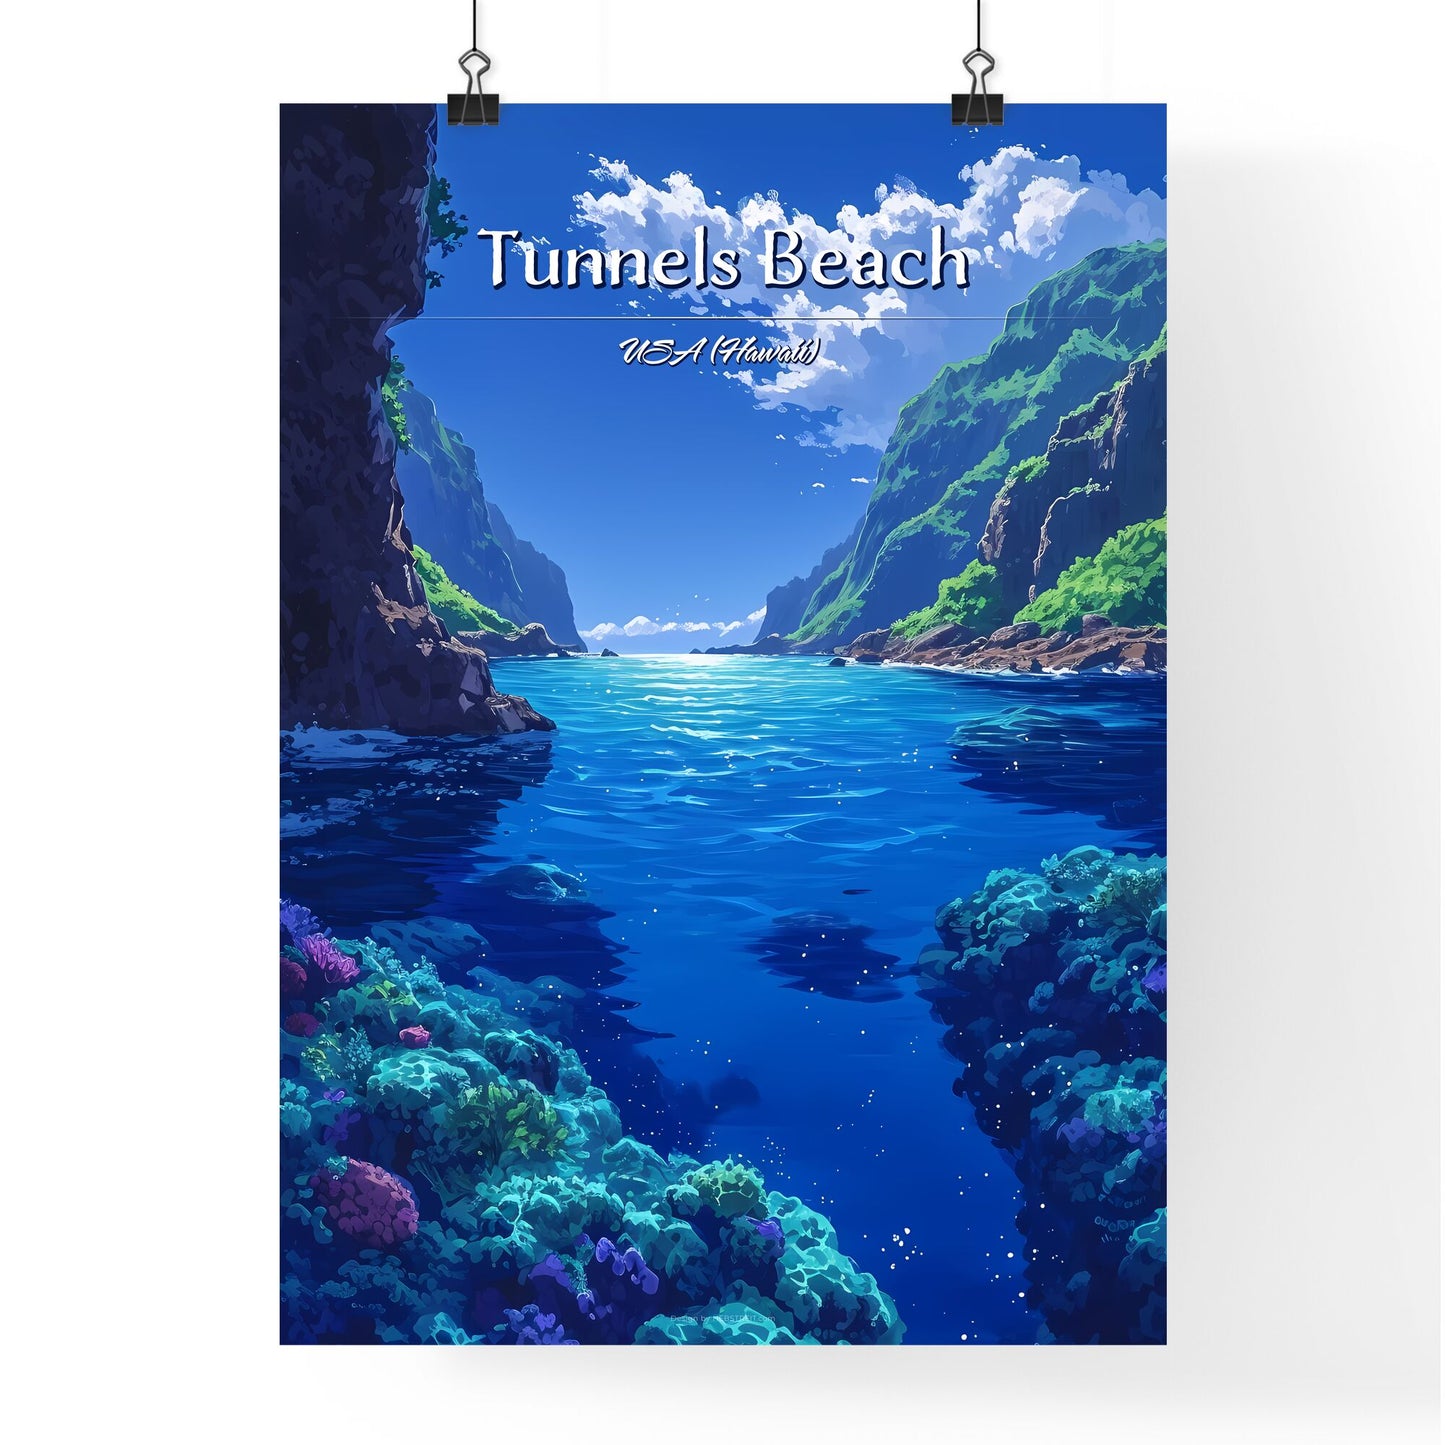 Tunnels Beach, USA (Hawaii) - Art print of a blue water with corals and rocks Default Title